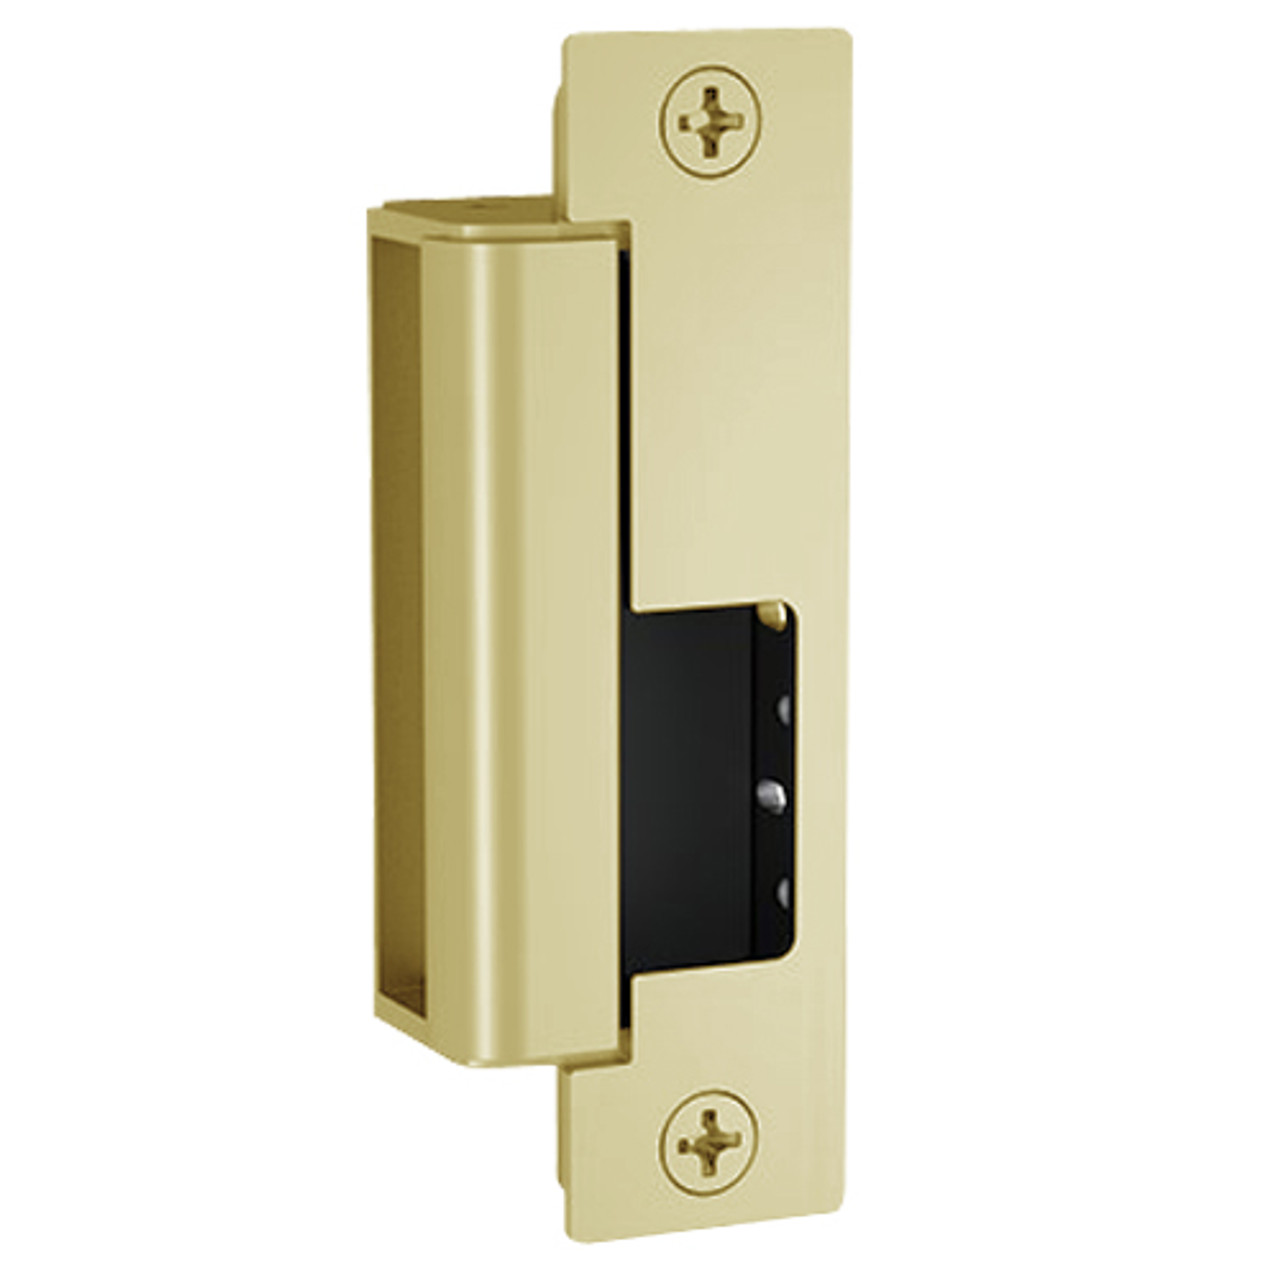 1500C-LMS-606 Hes 1500 Series Heavy Duty Complete Electric Strike with Lock Monitor and Strike Monitor in Satin Brass